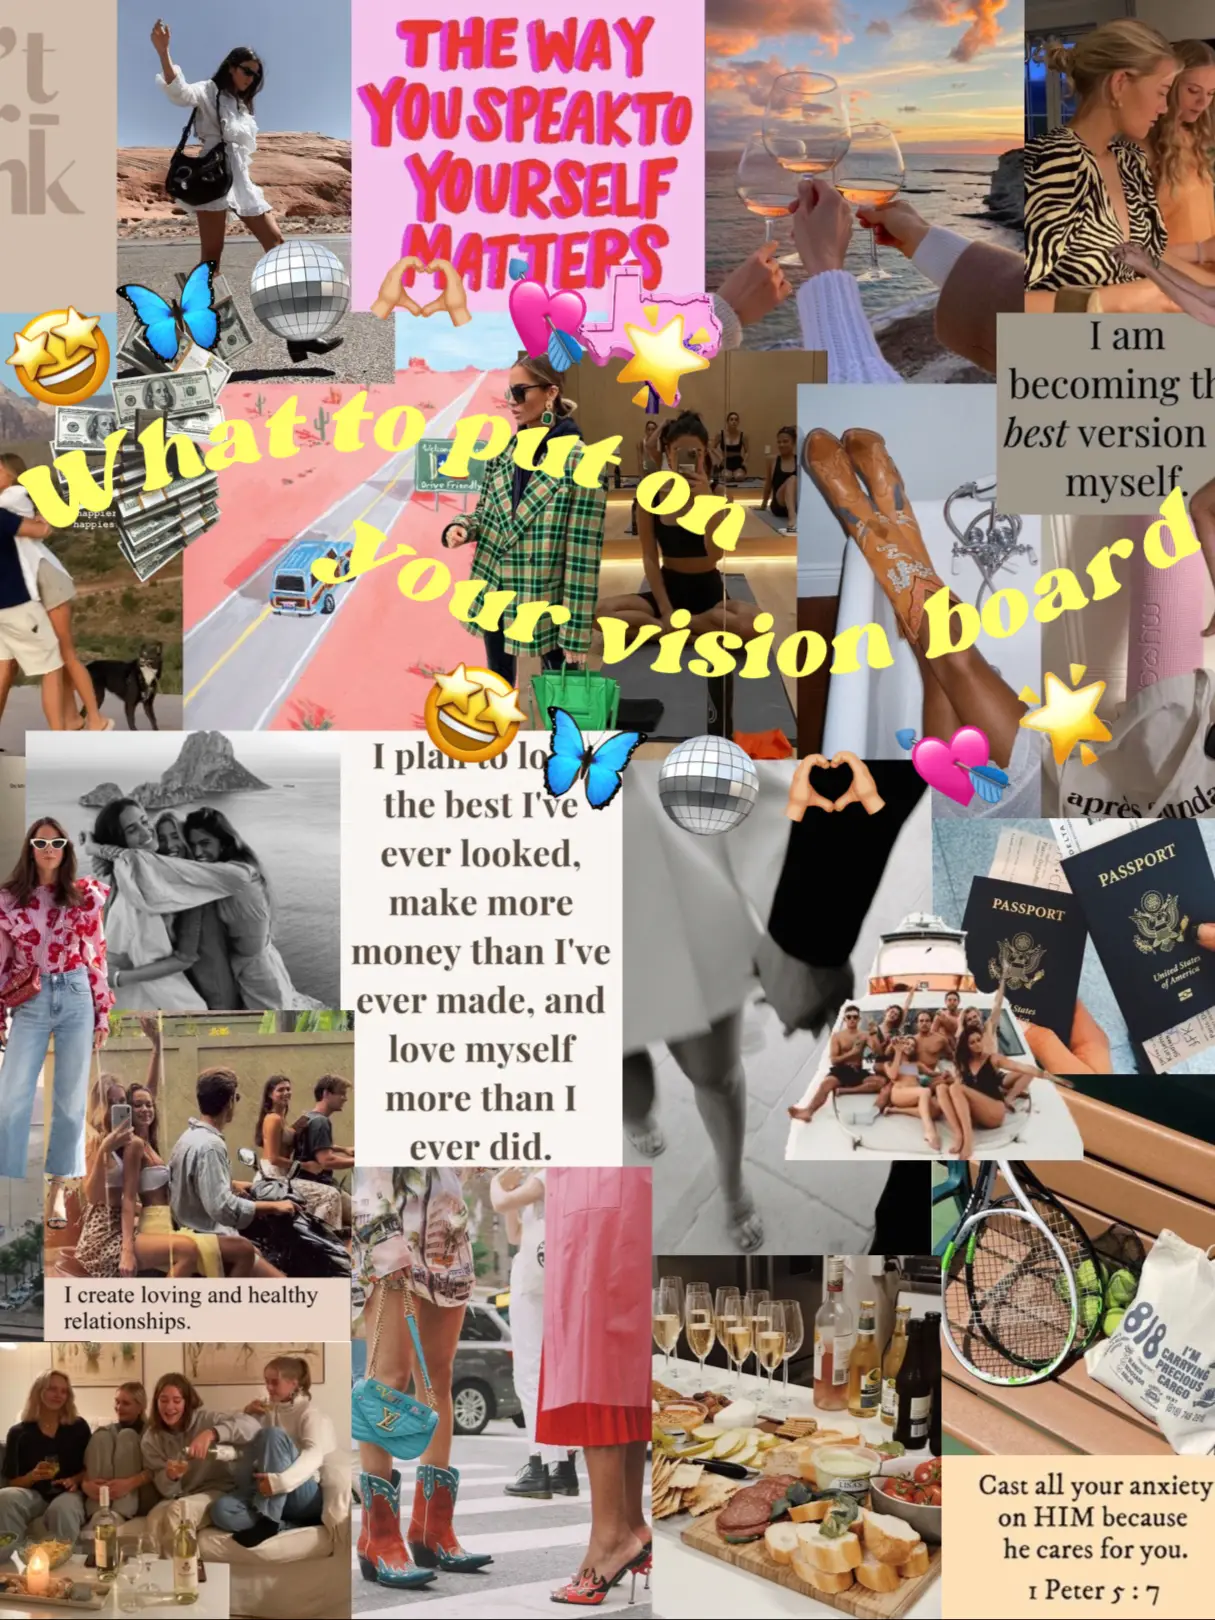 Vision Board Clip Art Book: Design Your Dream Life and Achieve Your Goals  With Inspiring Pictures, Quotes, Words, Affirmations, and Much More for Men   Board Supplies & Vision Board Magazines) by